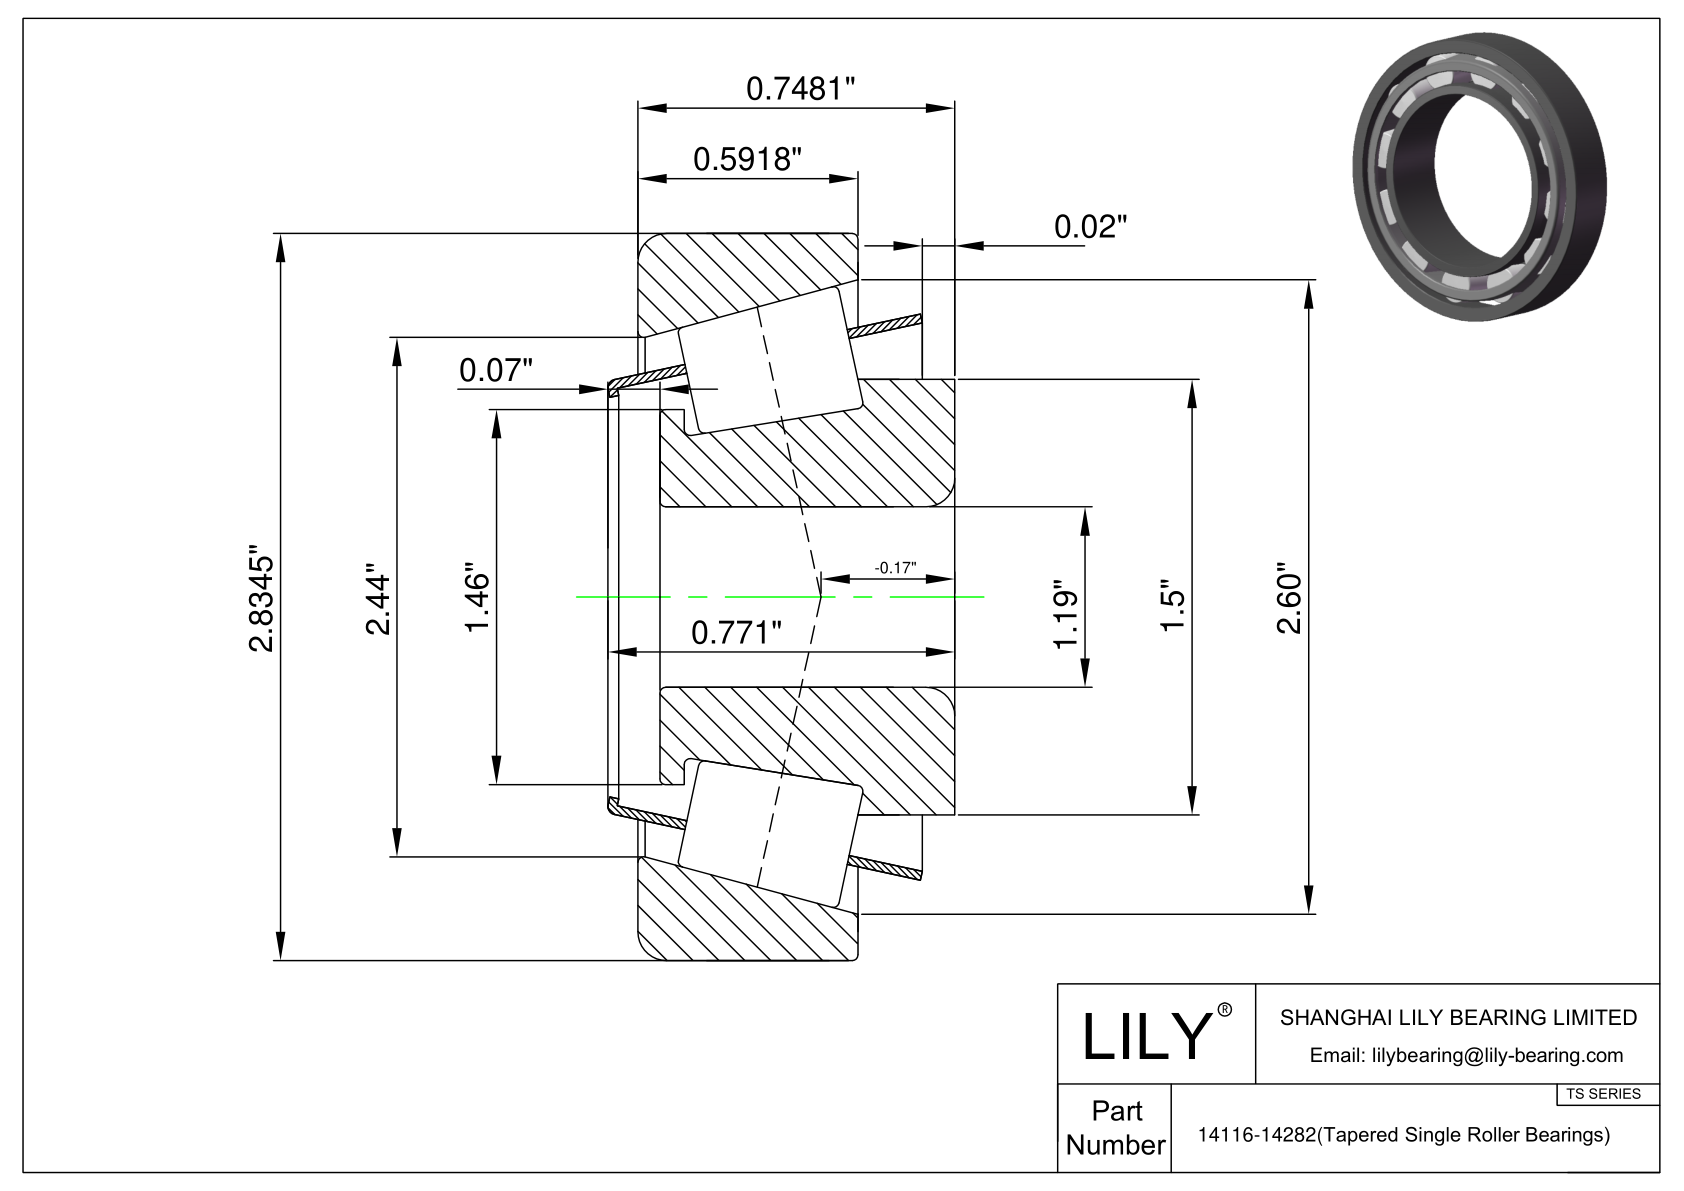 14116-14282 TS (Tapered Single Roller Bearings) (Imperial) cad drawing